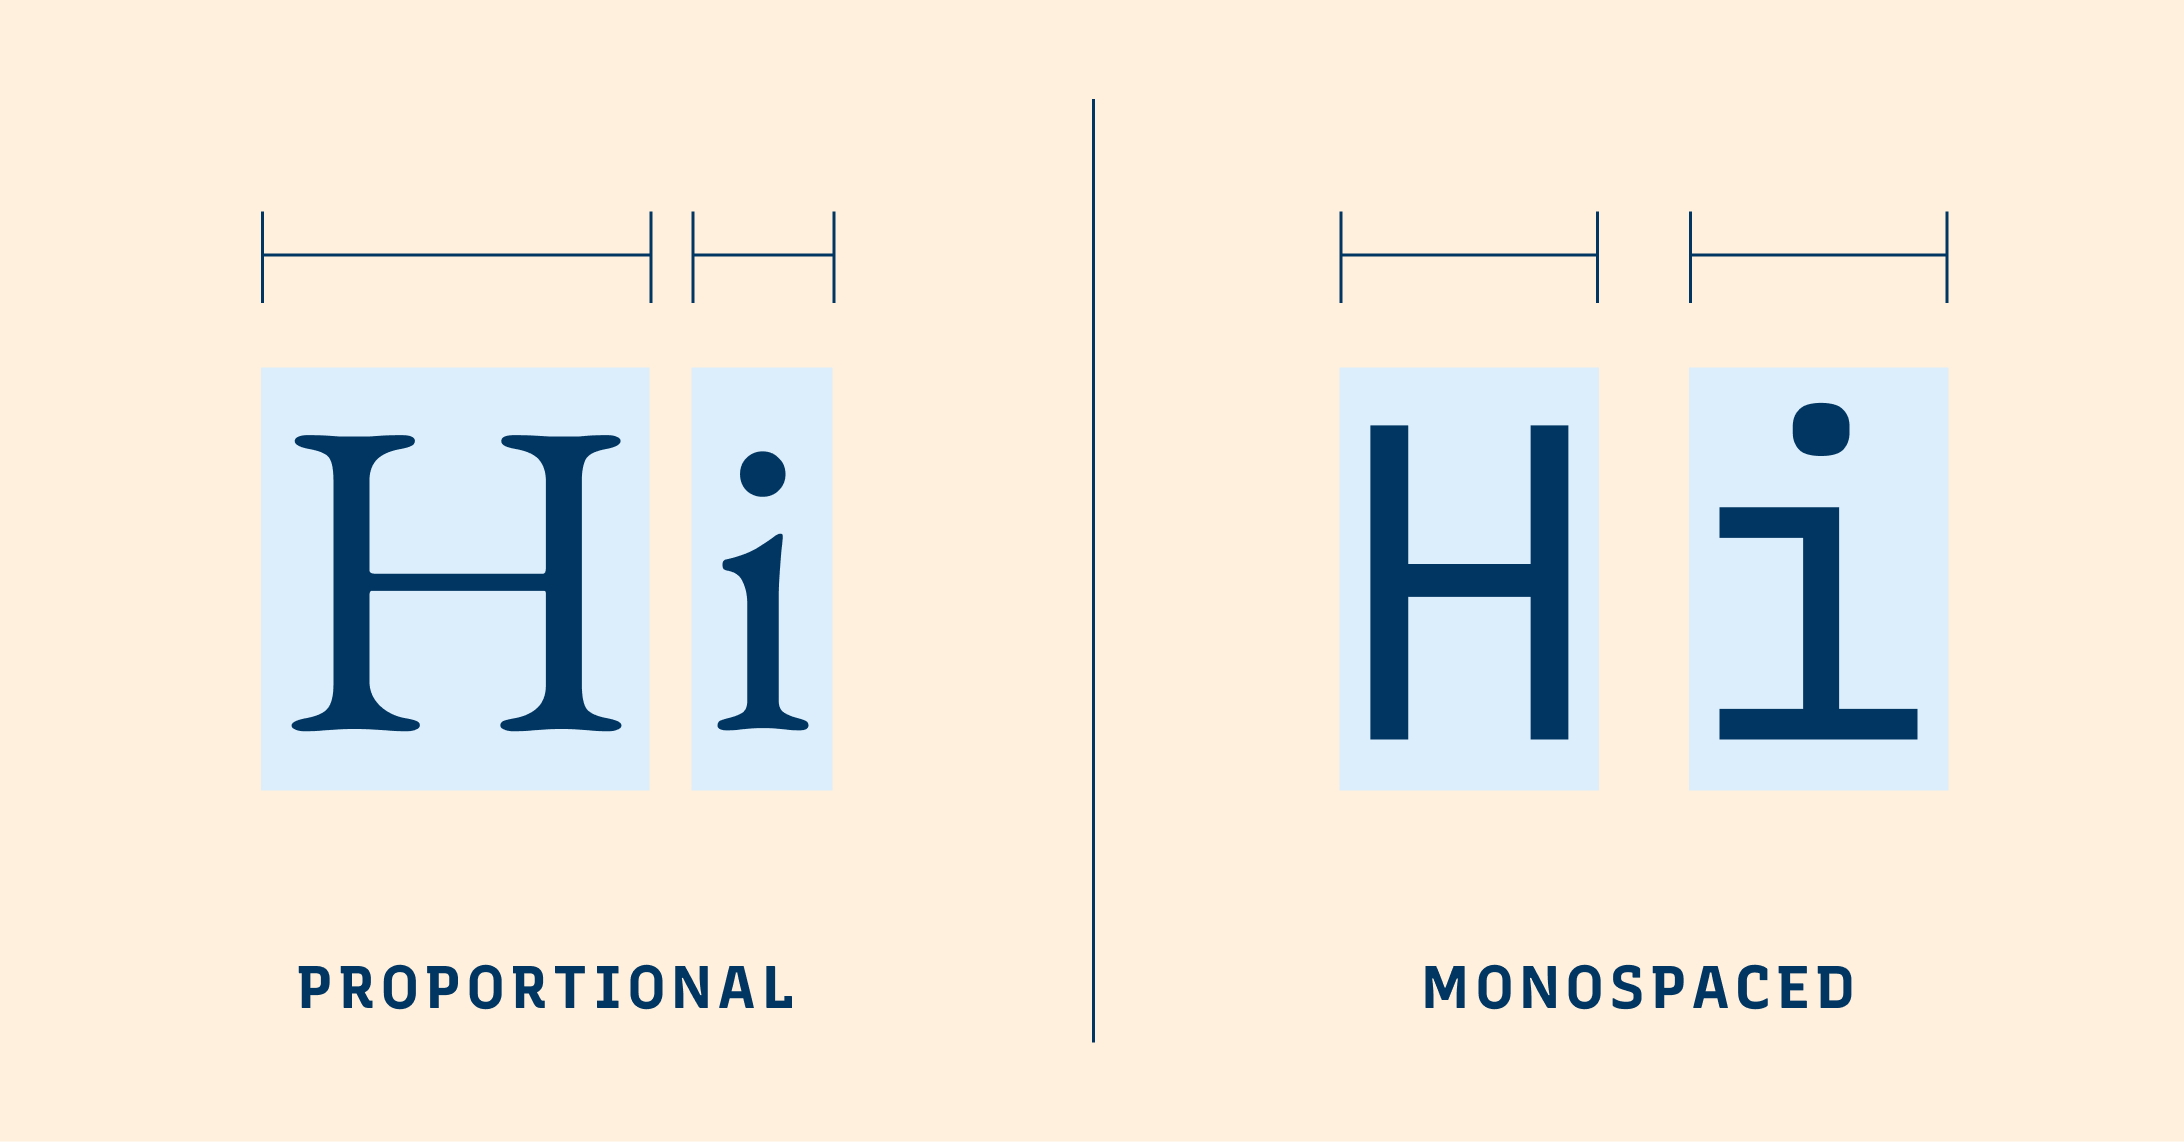 Proportional and Monospaced fonts